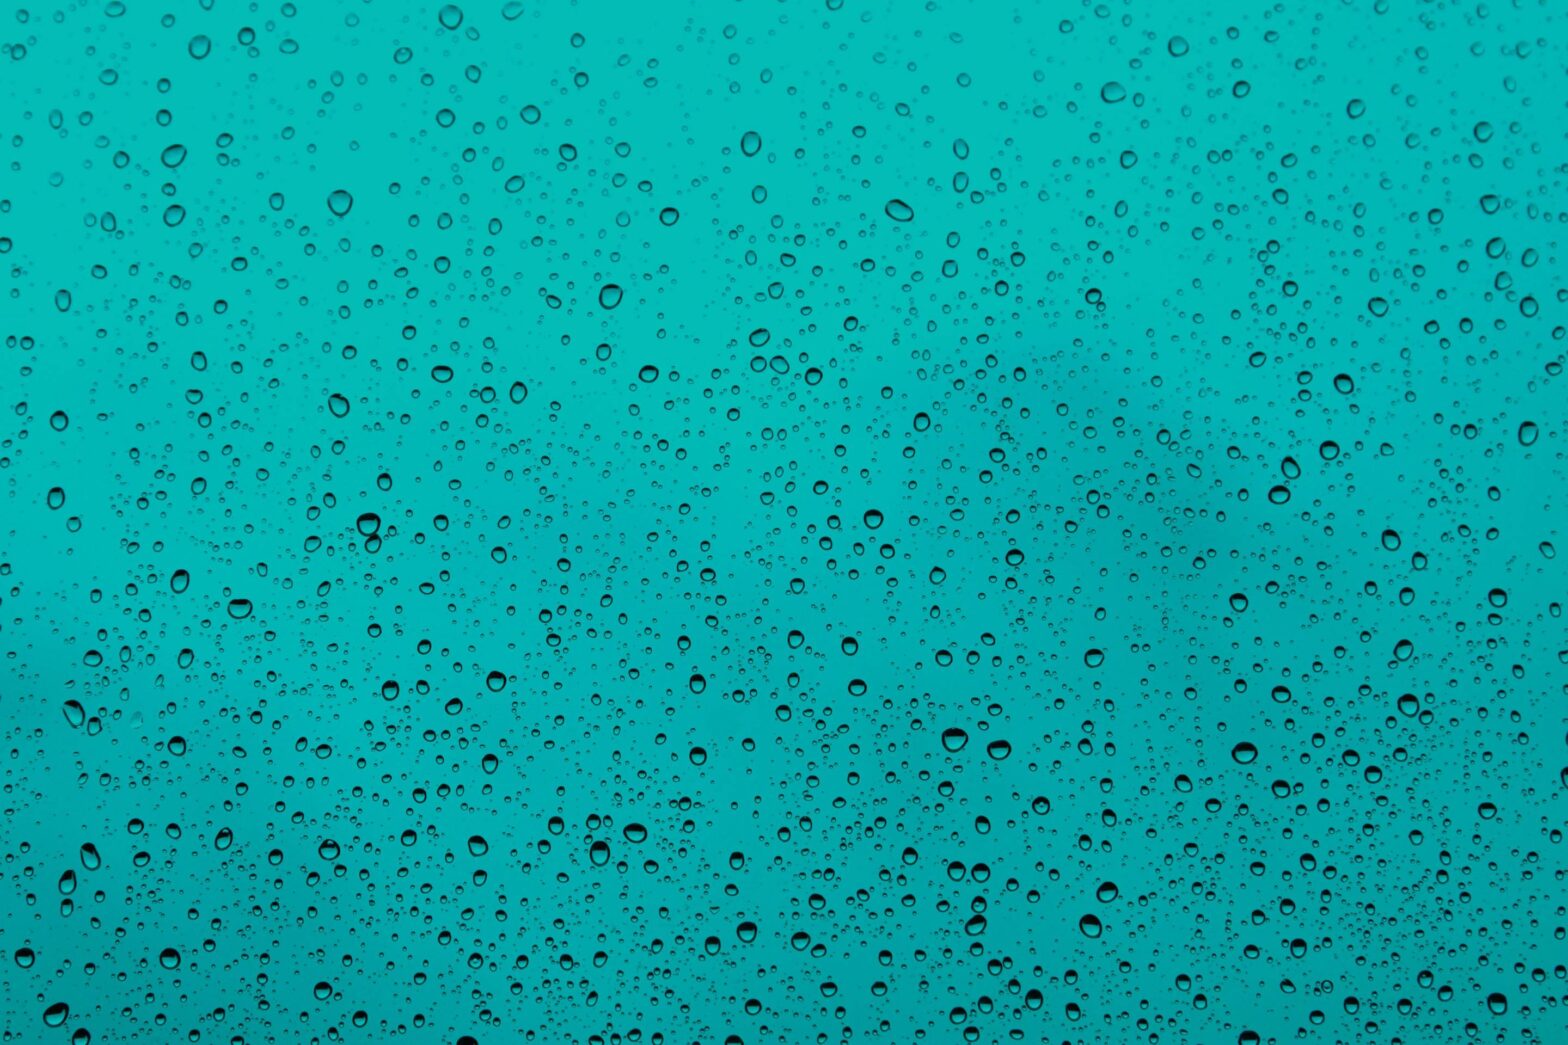 A stock photo of water and bubbles